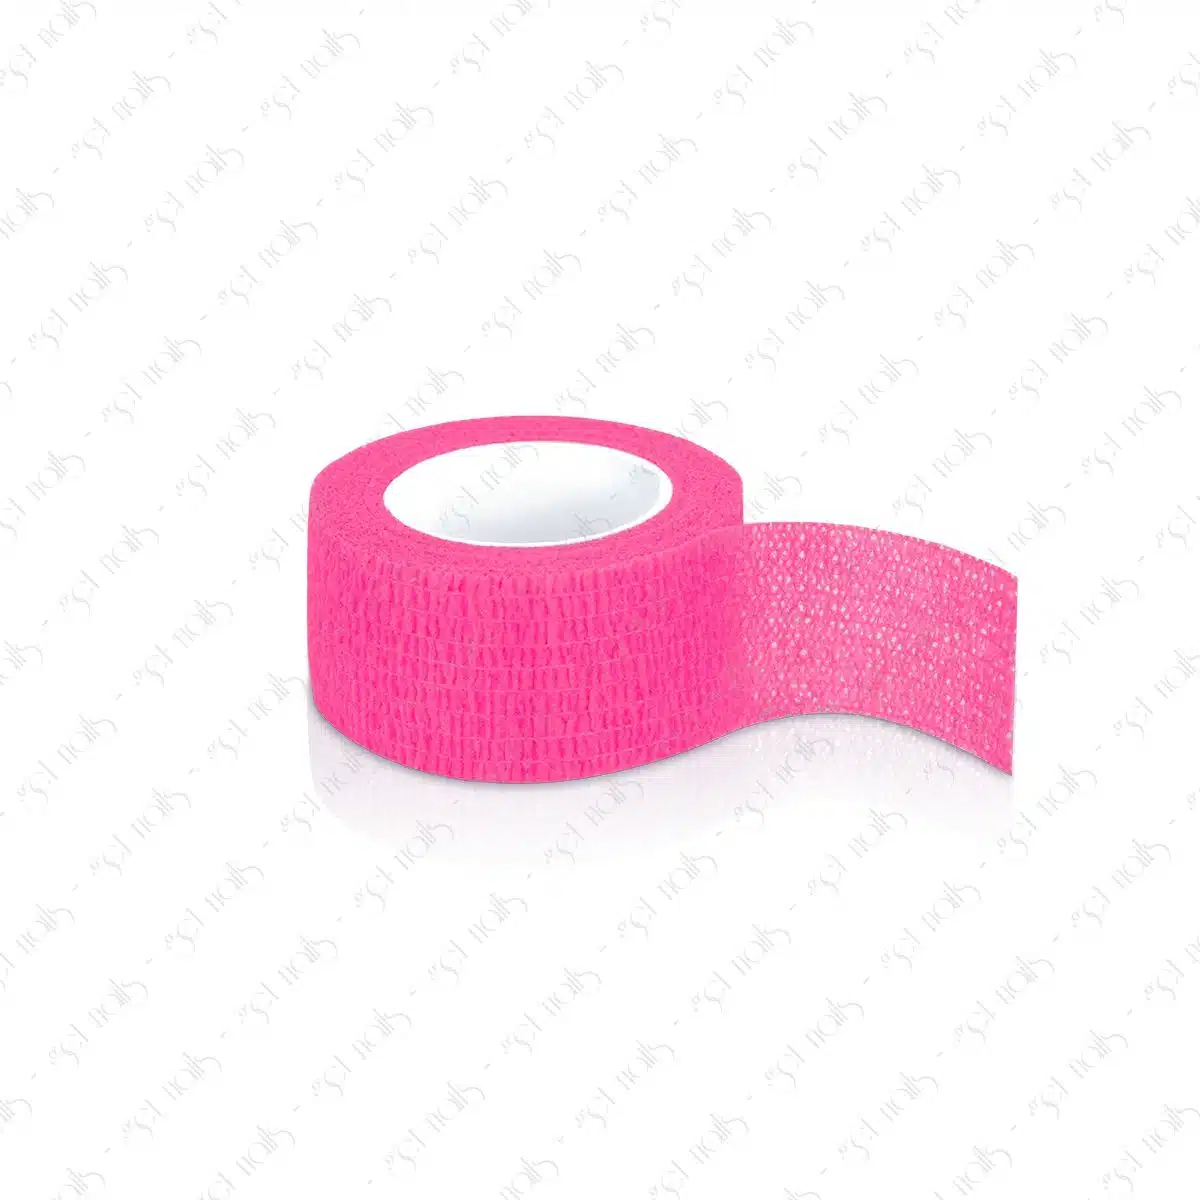 Get Nails Austria - File protection tape pink